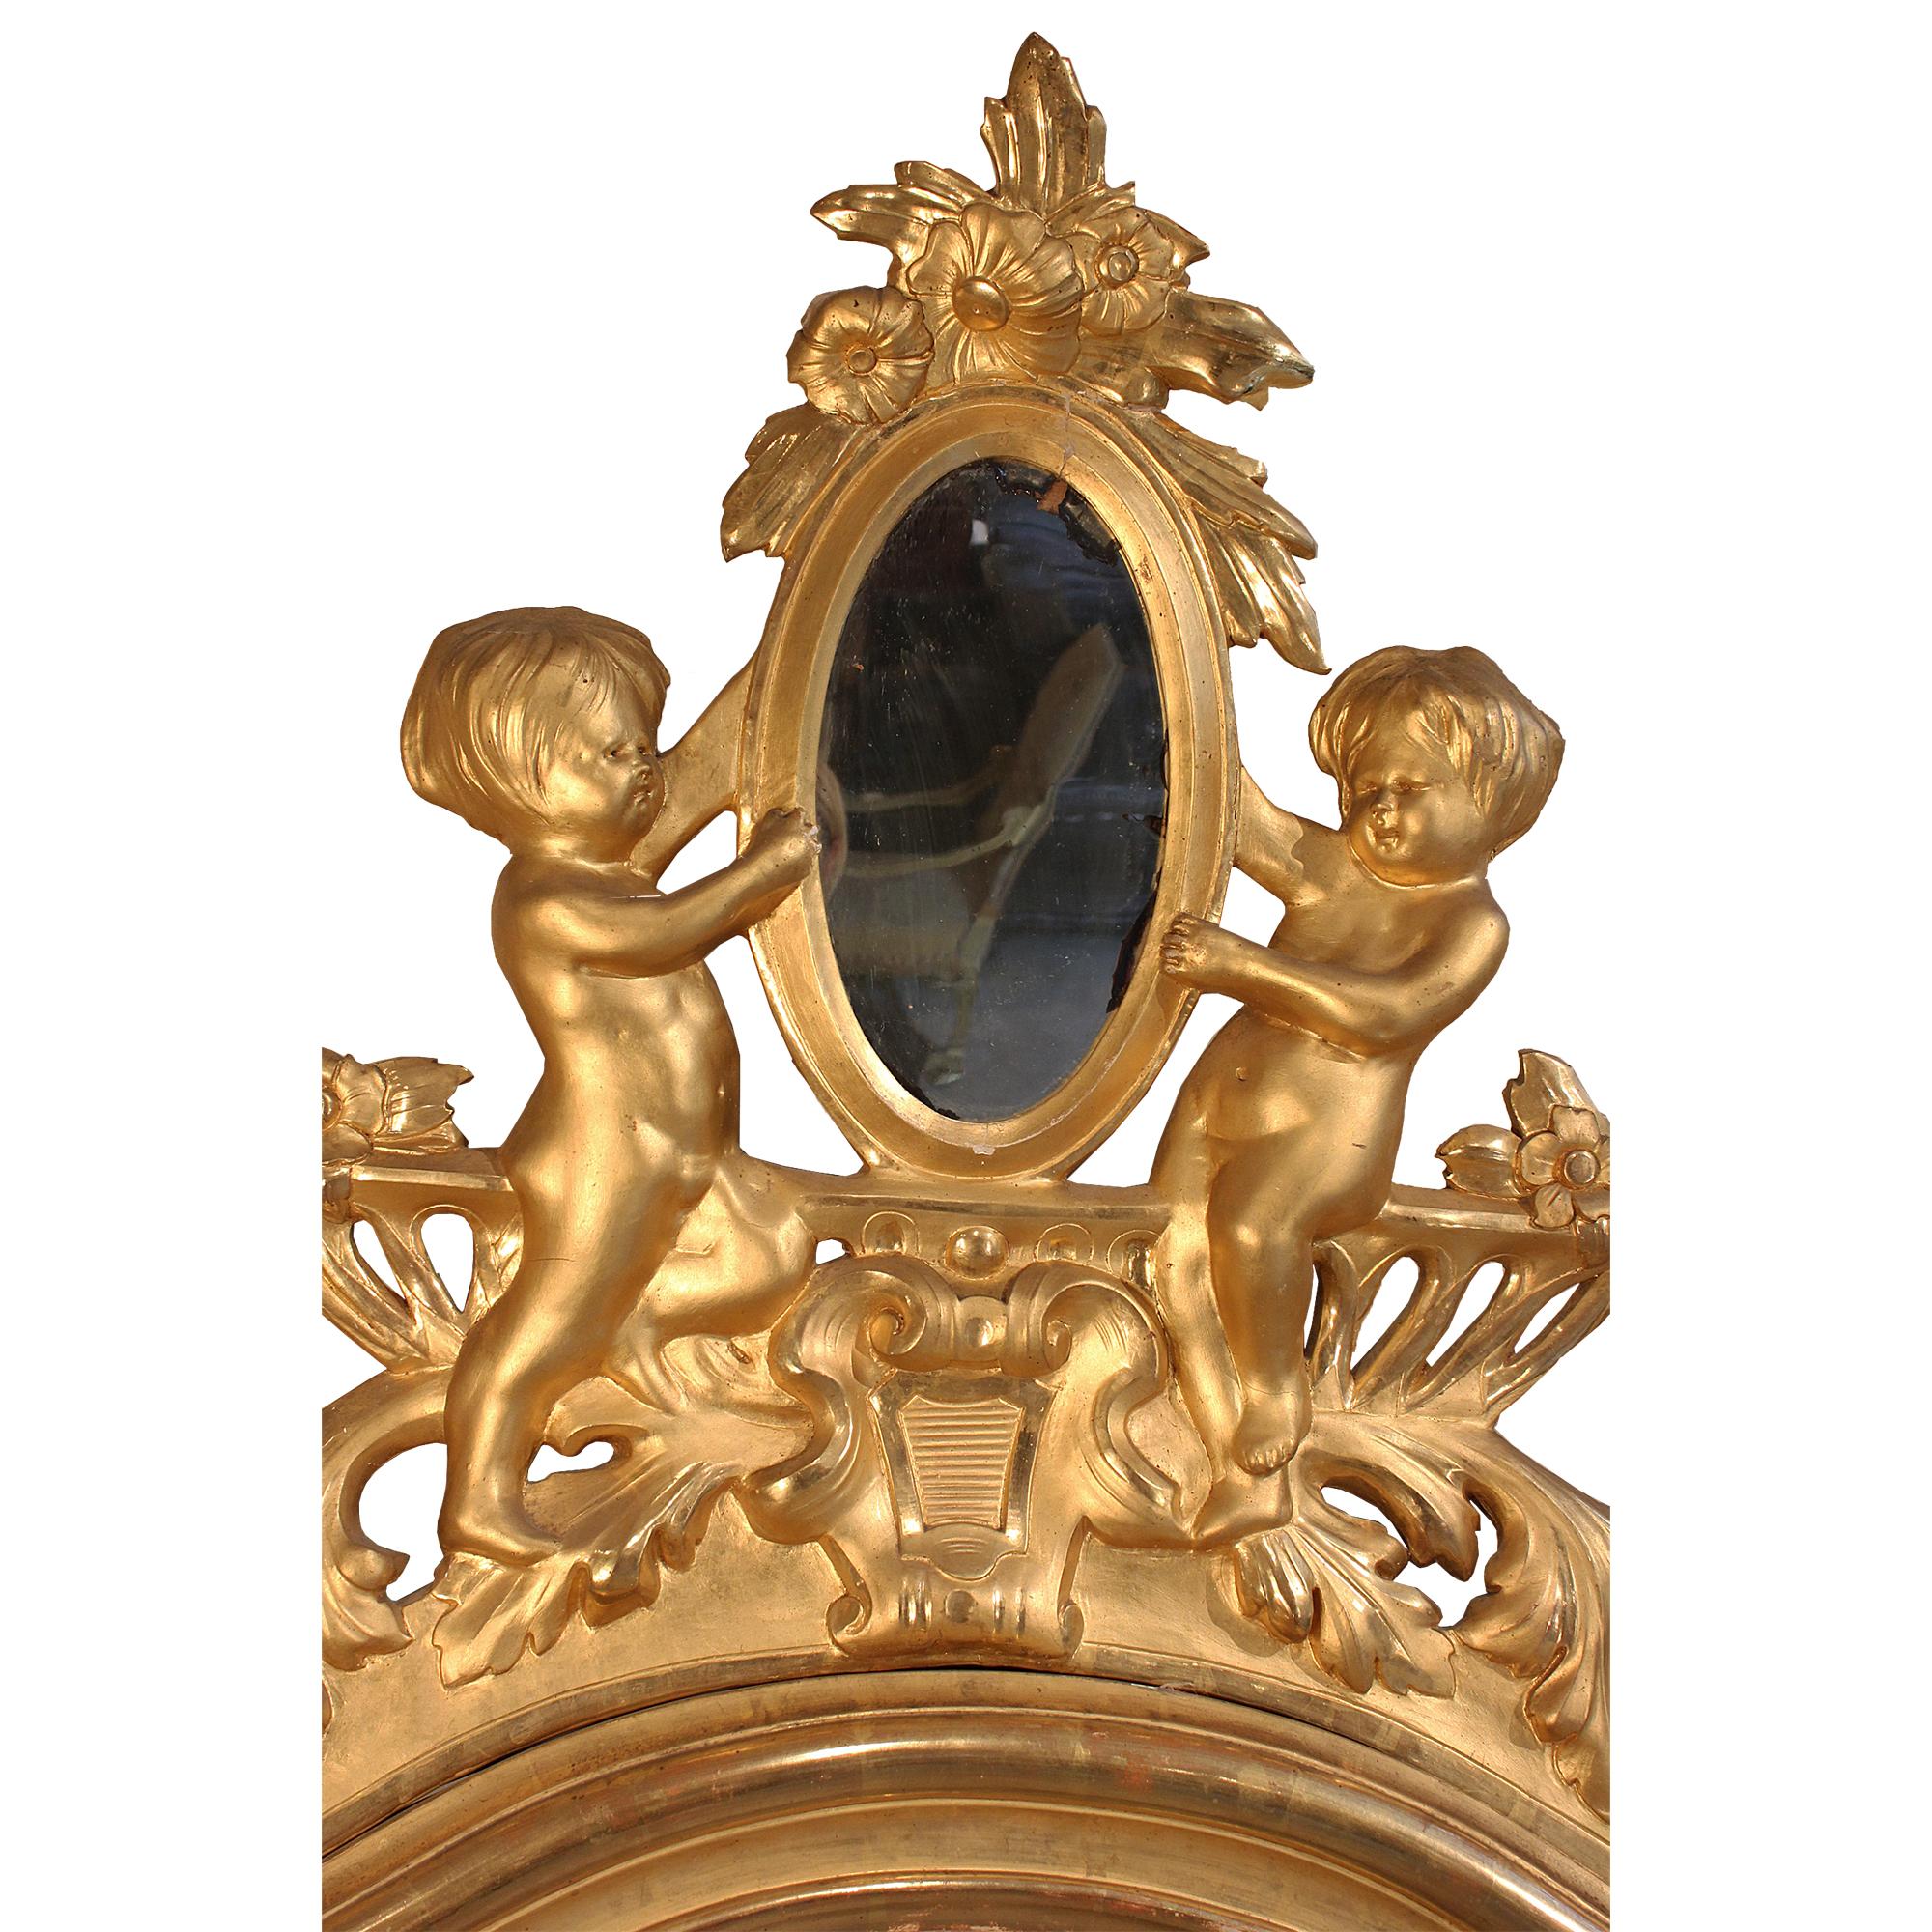 A spectacular pair of Italian 19th century giltwood mirrors. The rectangular moulded framed mirrors with curved top and pierced central reserve adorned by two charming cherubs displaying an oval mirror with flowers. Flanked by large scrolled